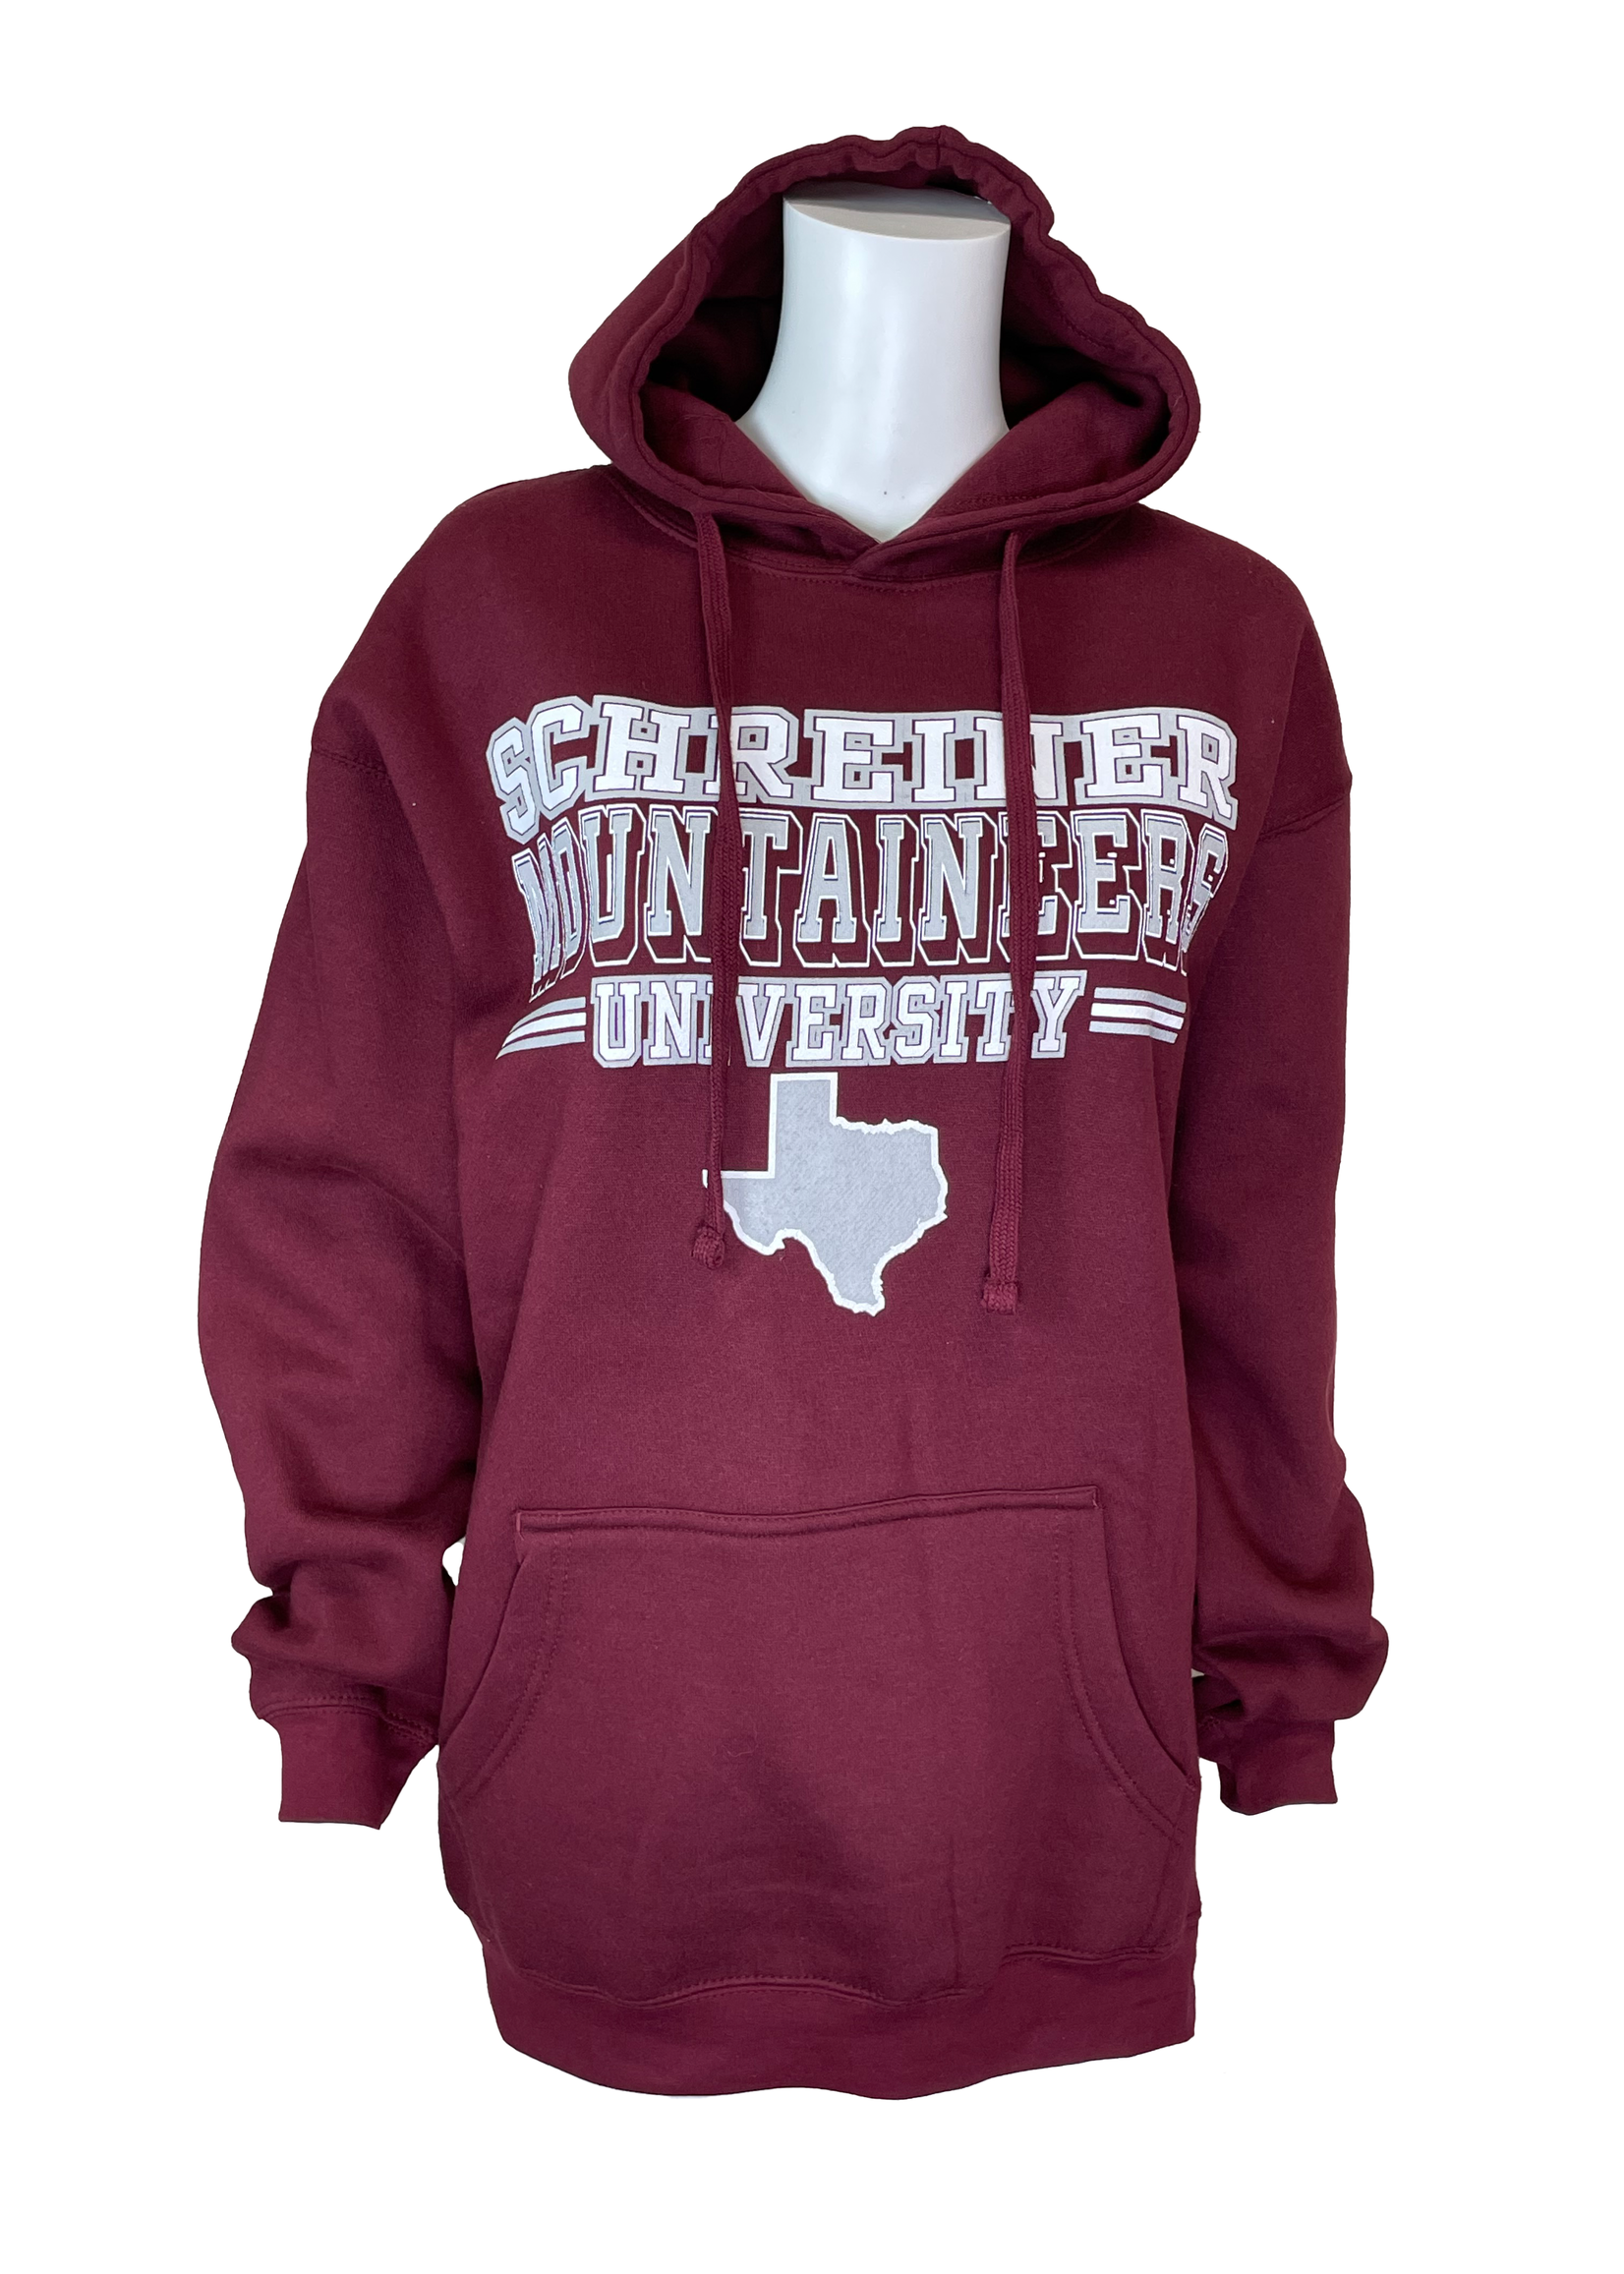 Ouray Sportswear Ouray Schreiner Mountaineers University Hoodie